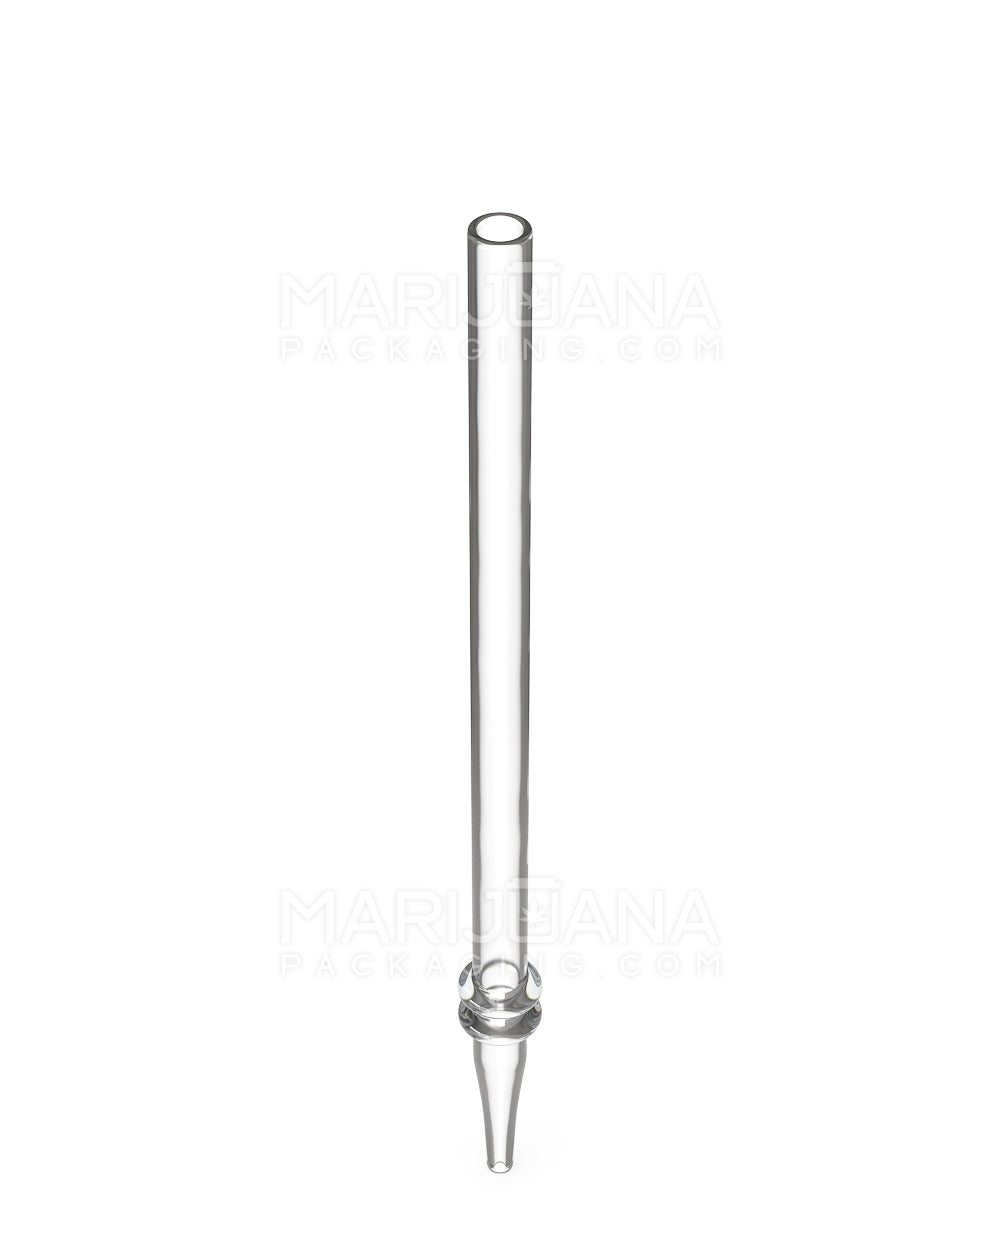 Assorted Mouthpiece Ringed Dab Straw | 6.5in Long - Glass - Clear - 6